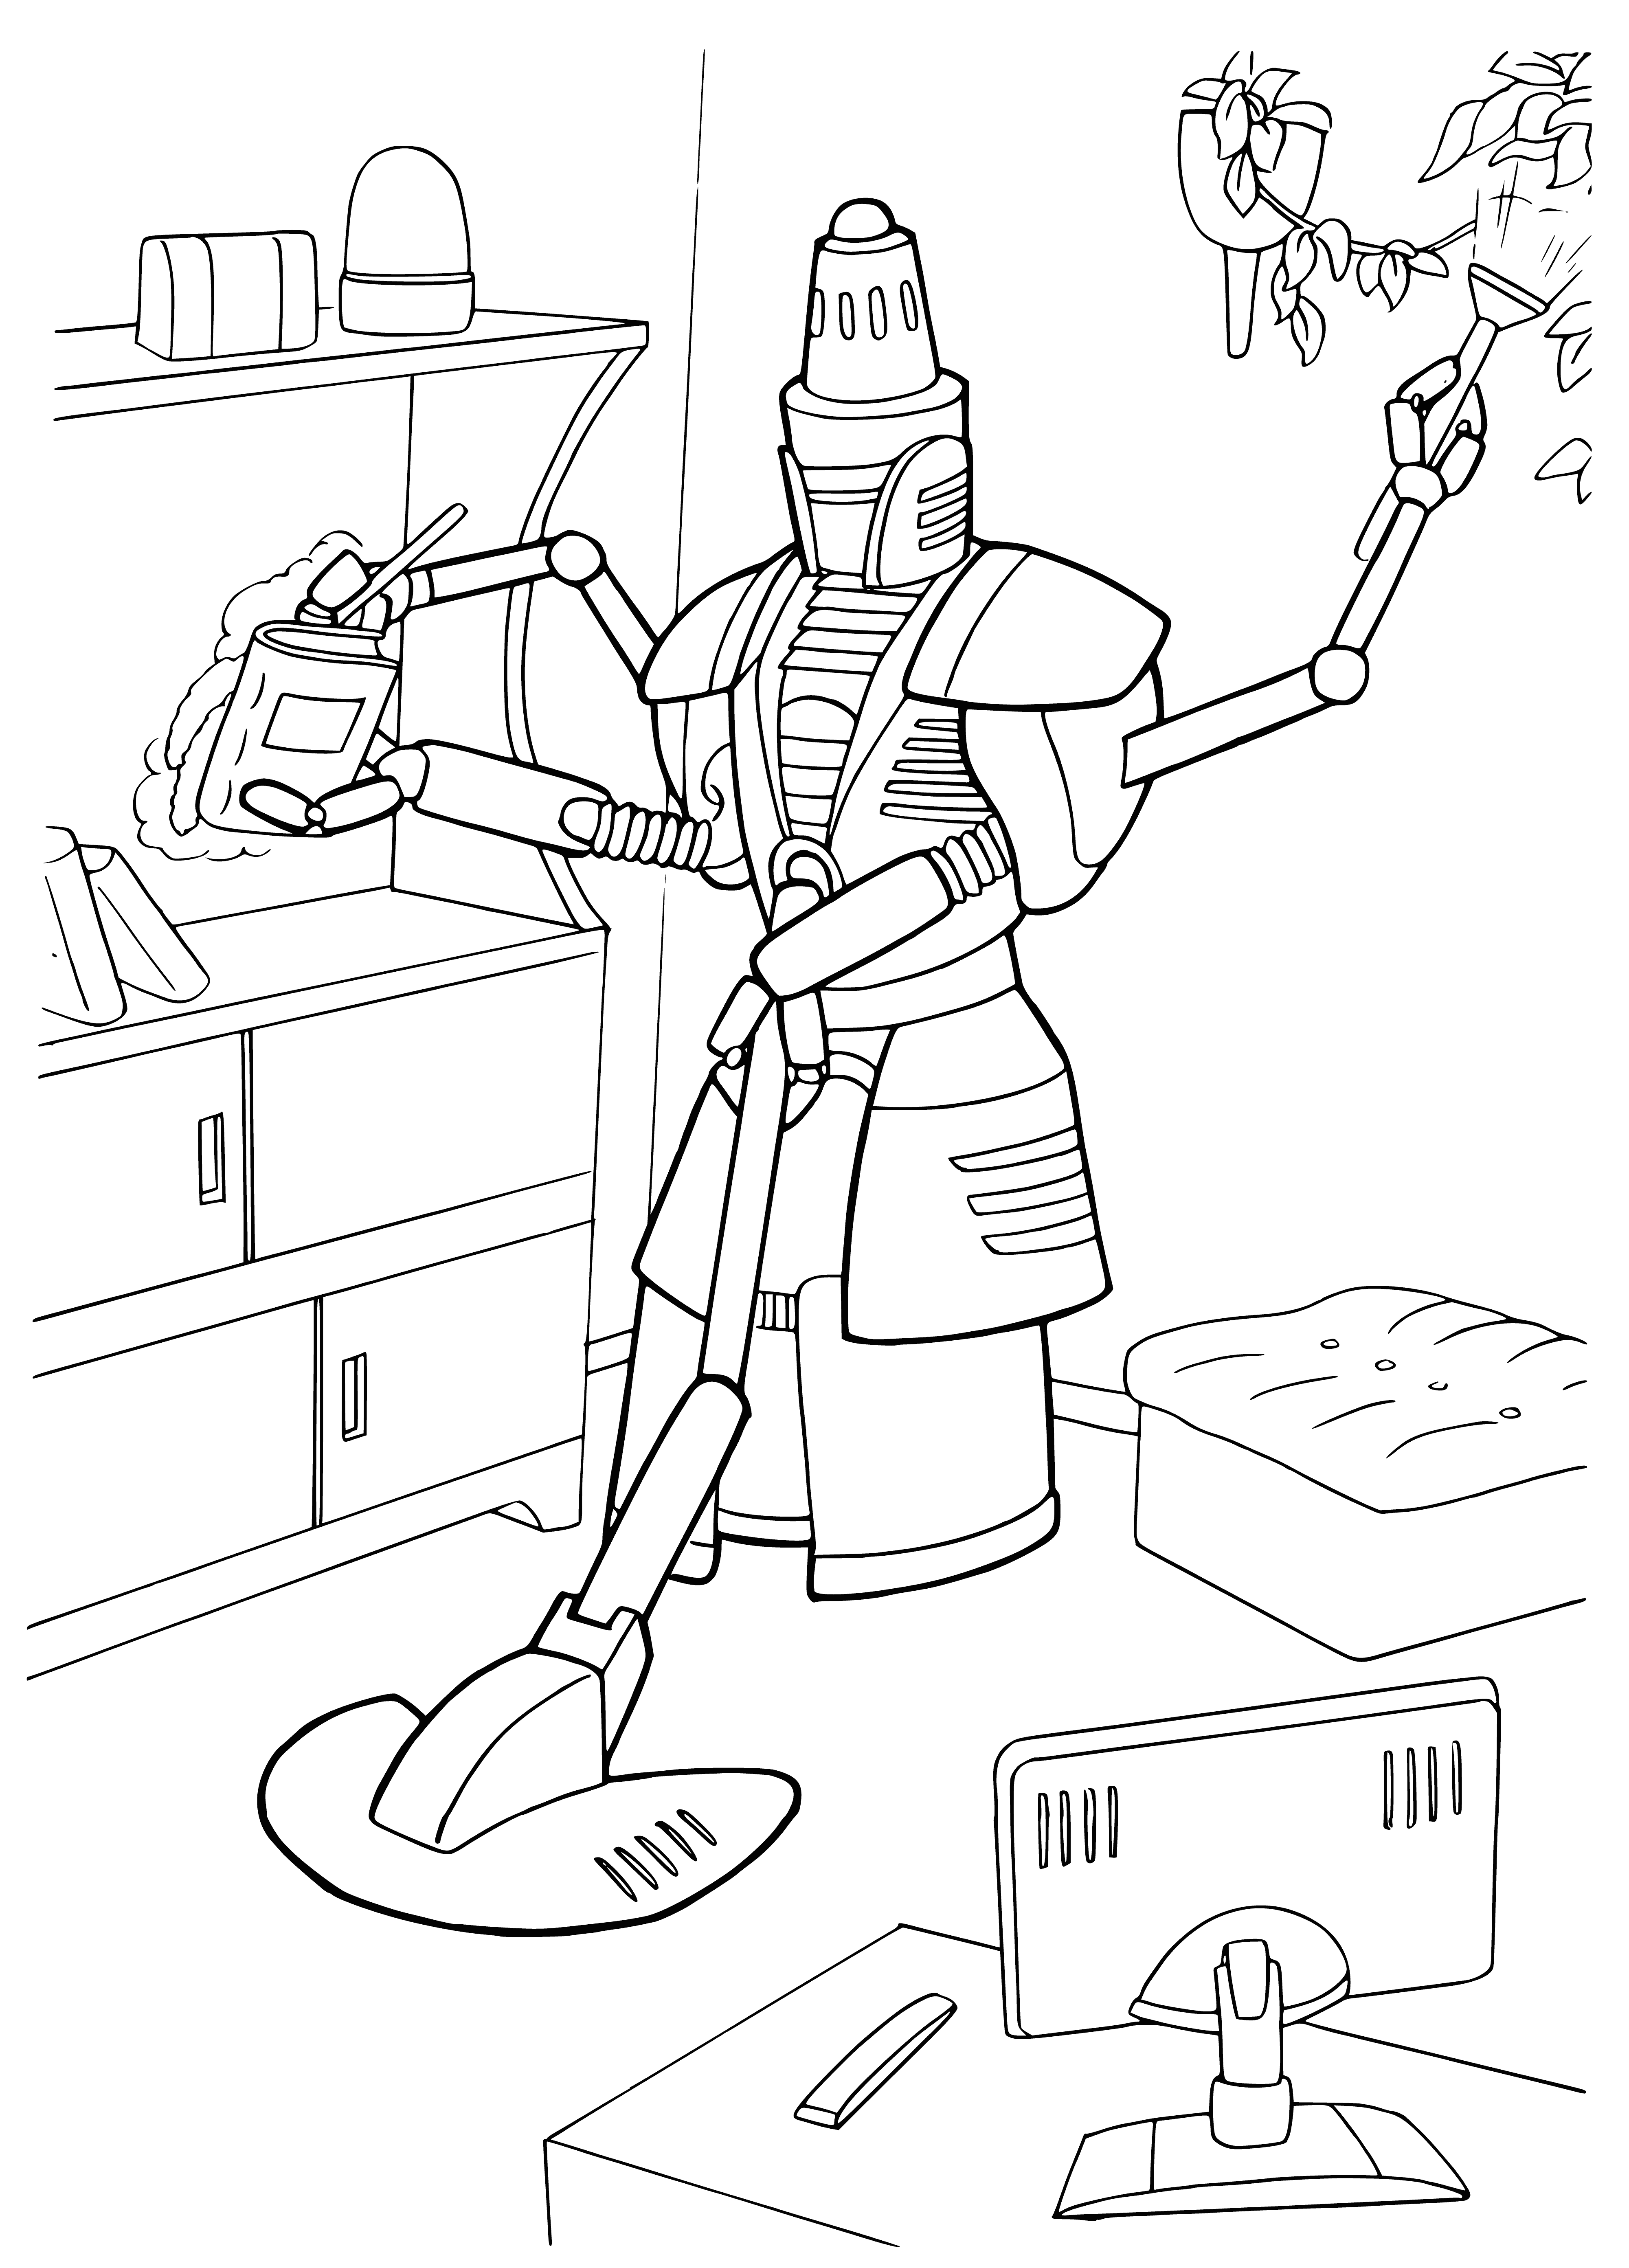 coloring page: Robot designed to clean the house has two arms w/ brushes, two legs w/ pads, and back-mounted vac.